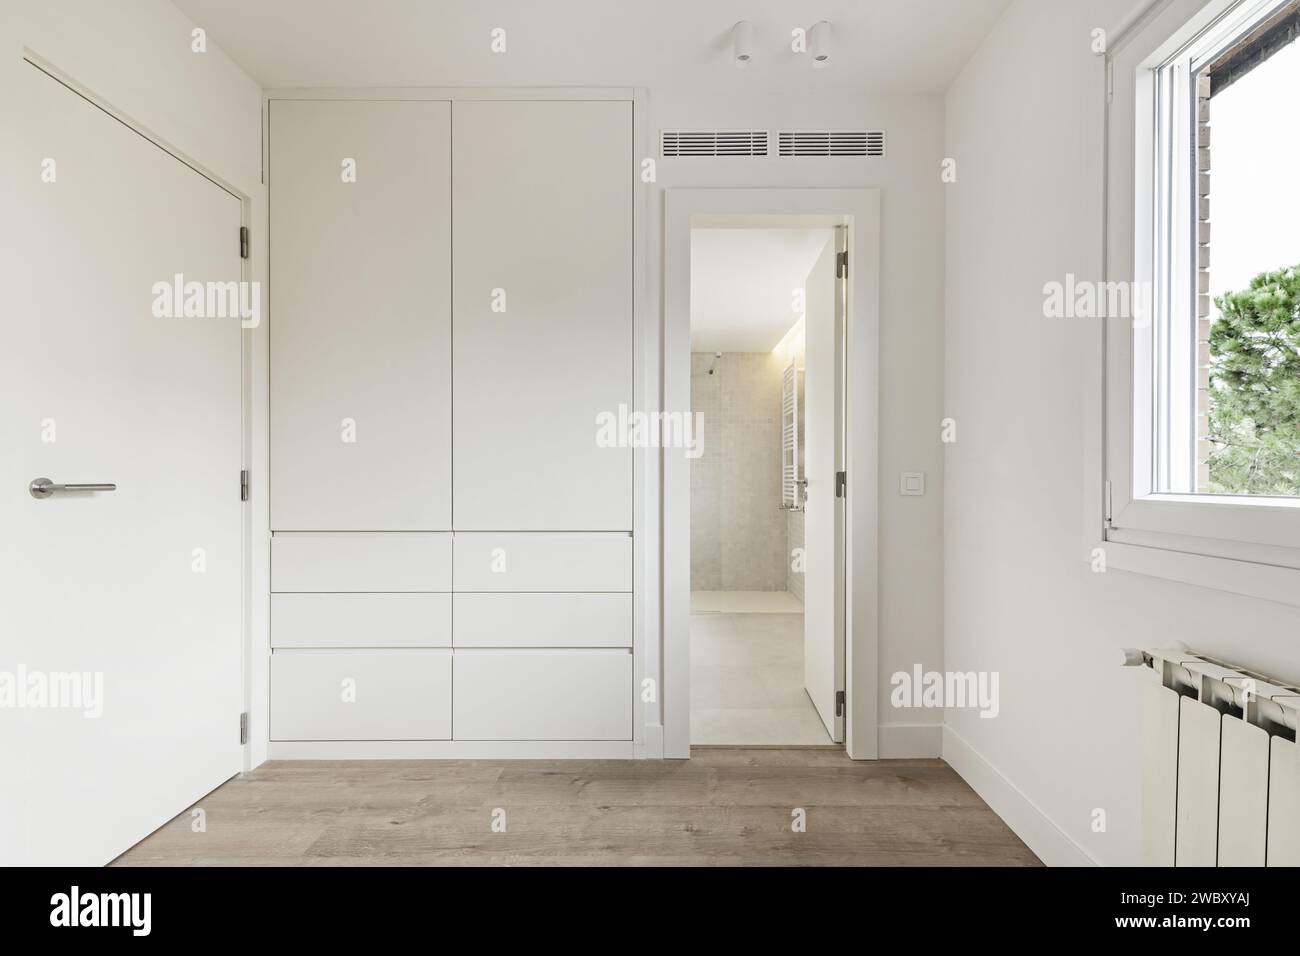 A walk-in closet next to an en-suite bathroom with white cabinet drawers and doors and white oak flooring Stock Photo